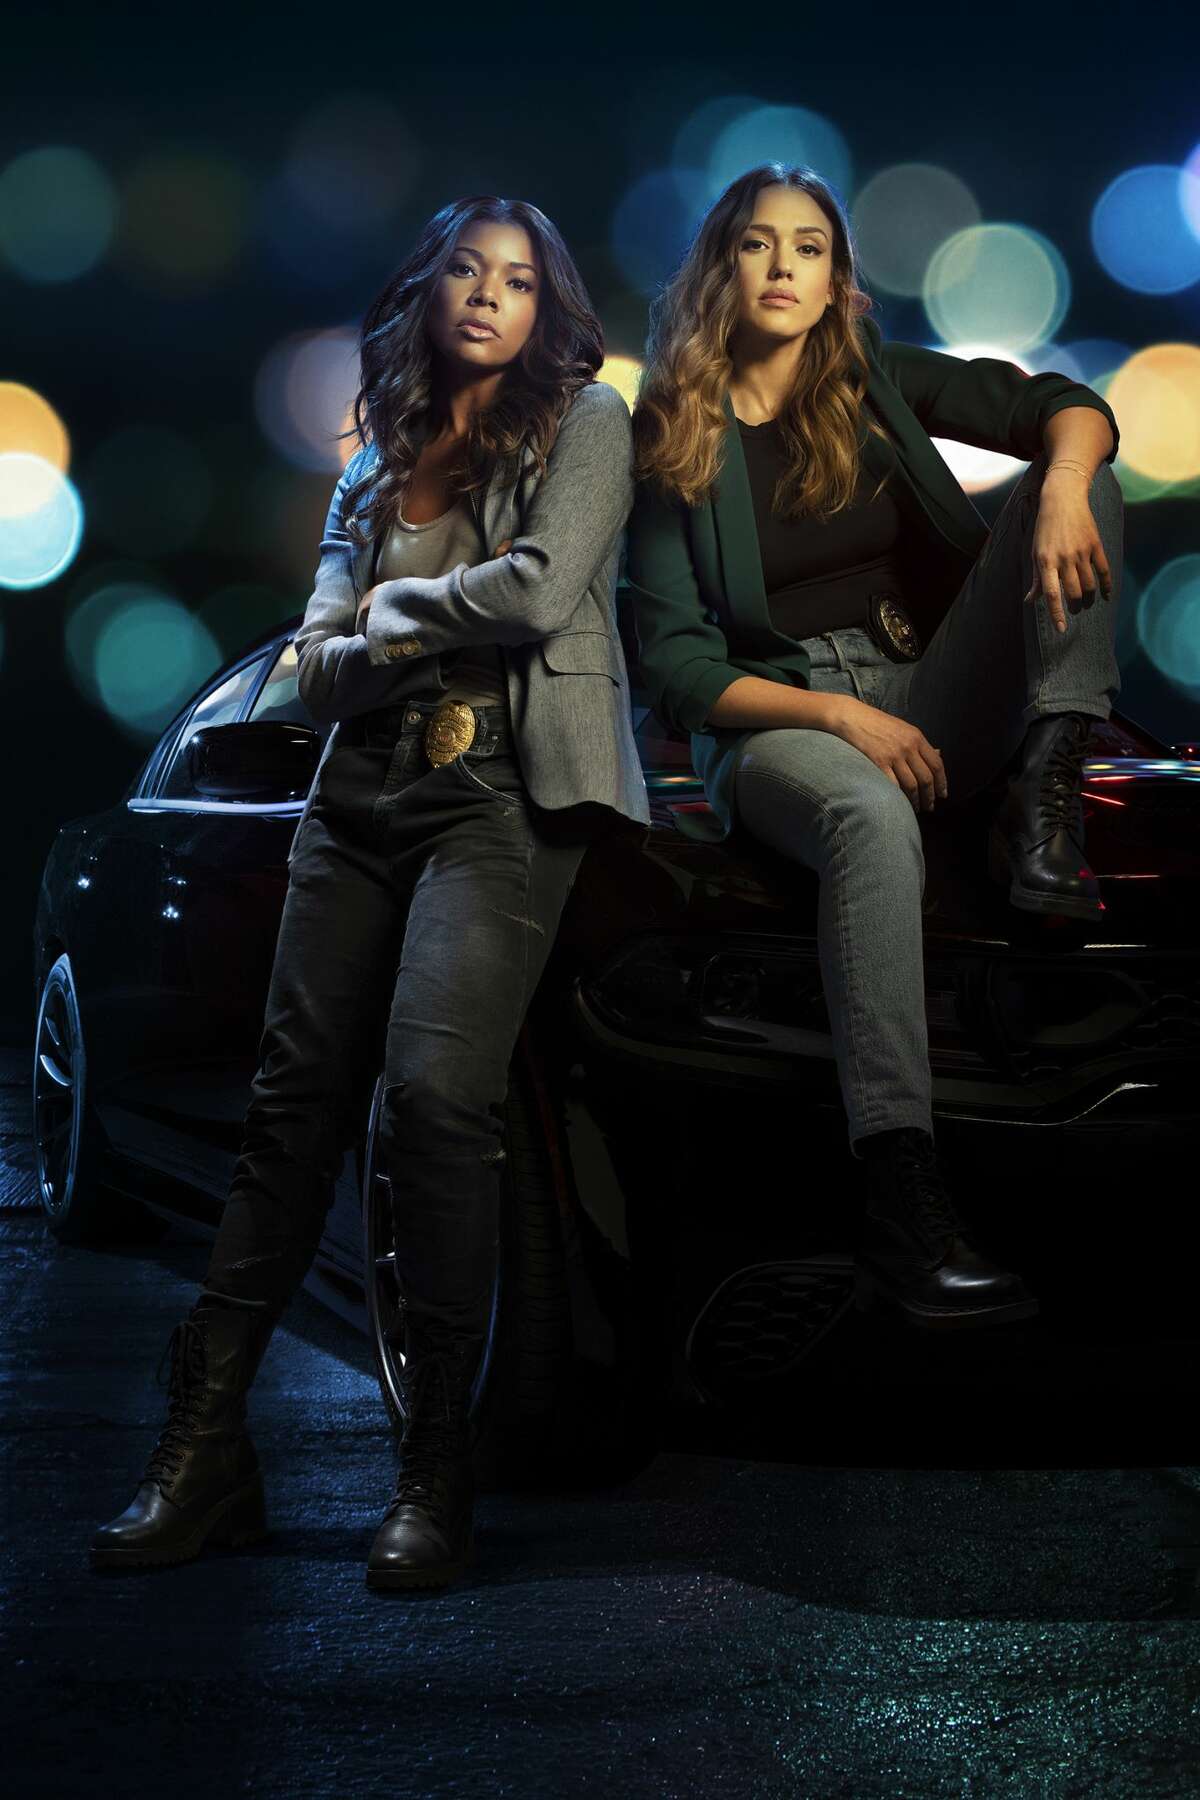 L.A.'s Finest: Mondays at 7/8 p.m. on Fox. "L.A.'s Finest" stars Jessica Alba and Gabrielle Union as Los Angeles cops in this sequel to the "Bad Boys" films.